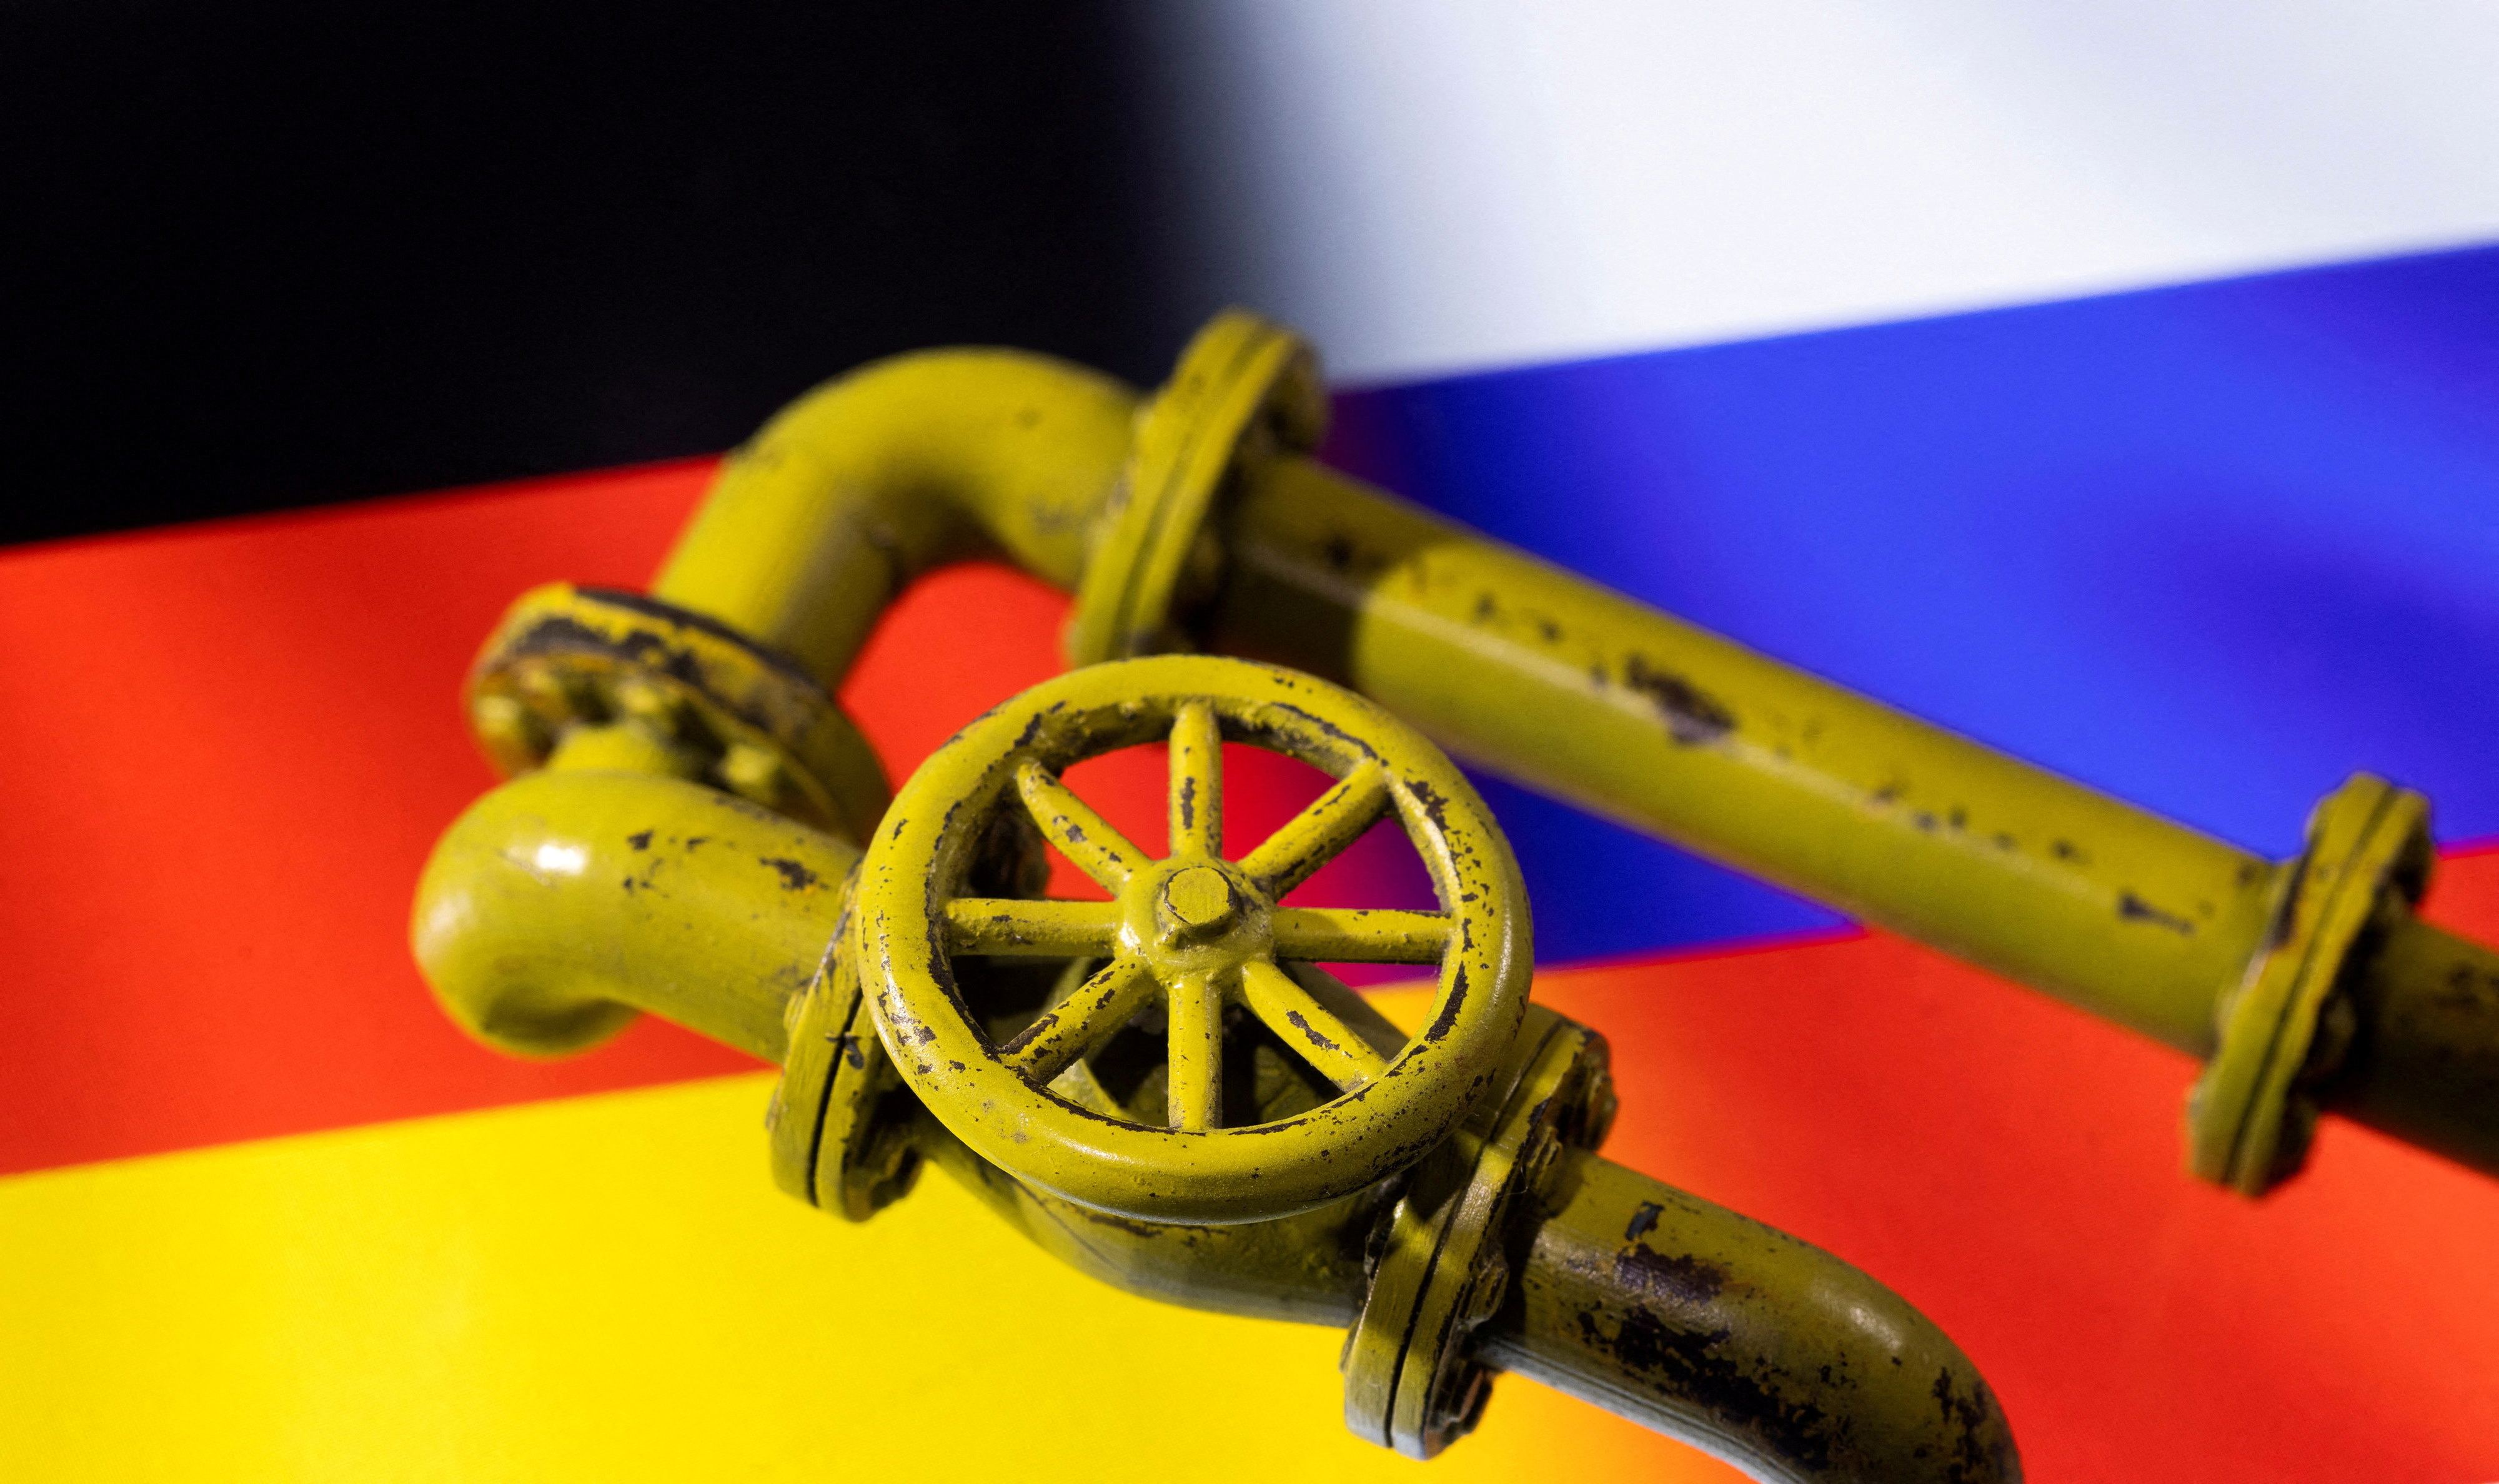 Illustration shows Natural Gas Pipes and German and Russian flags